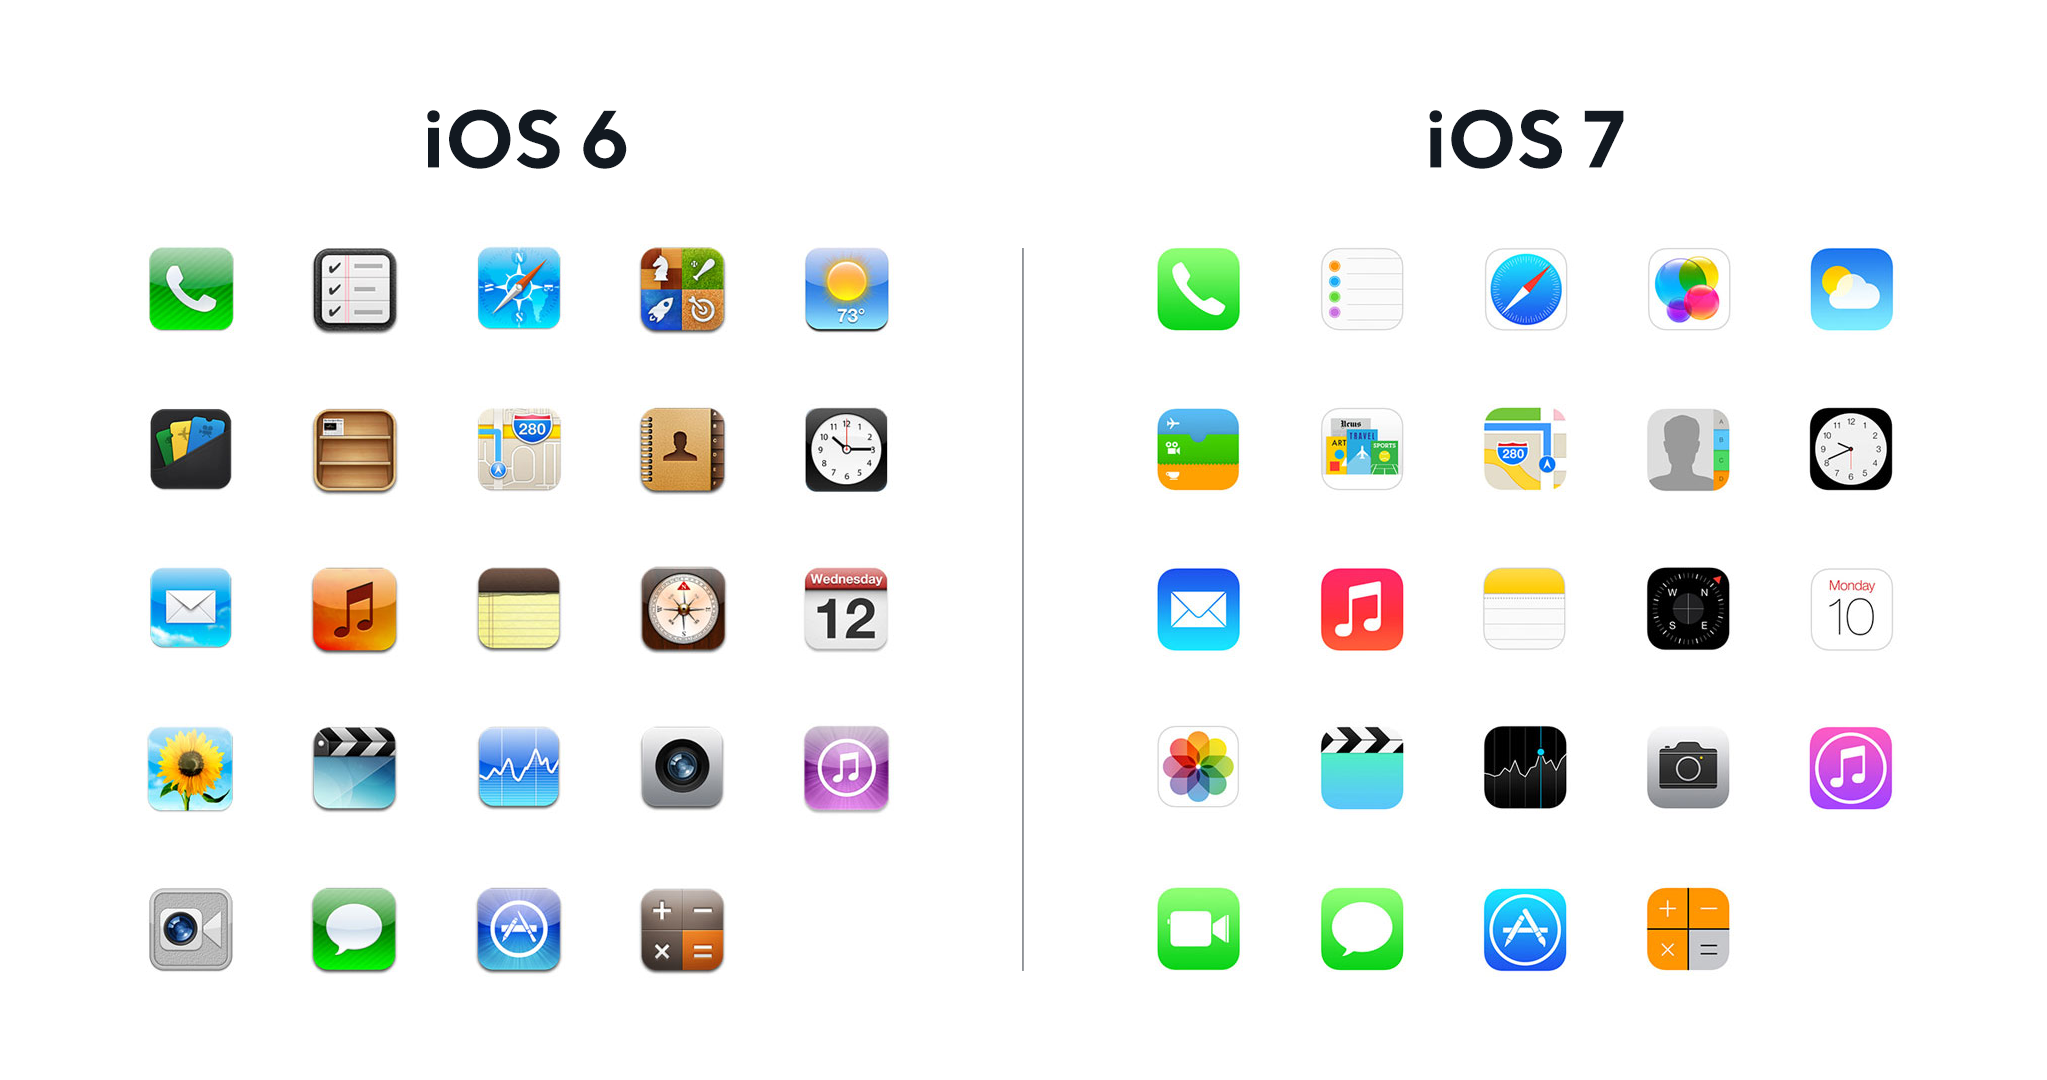 A side by side graphic showing iOS 6 applications versus iOS 7 applications